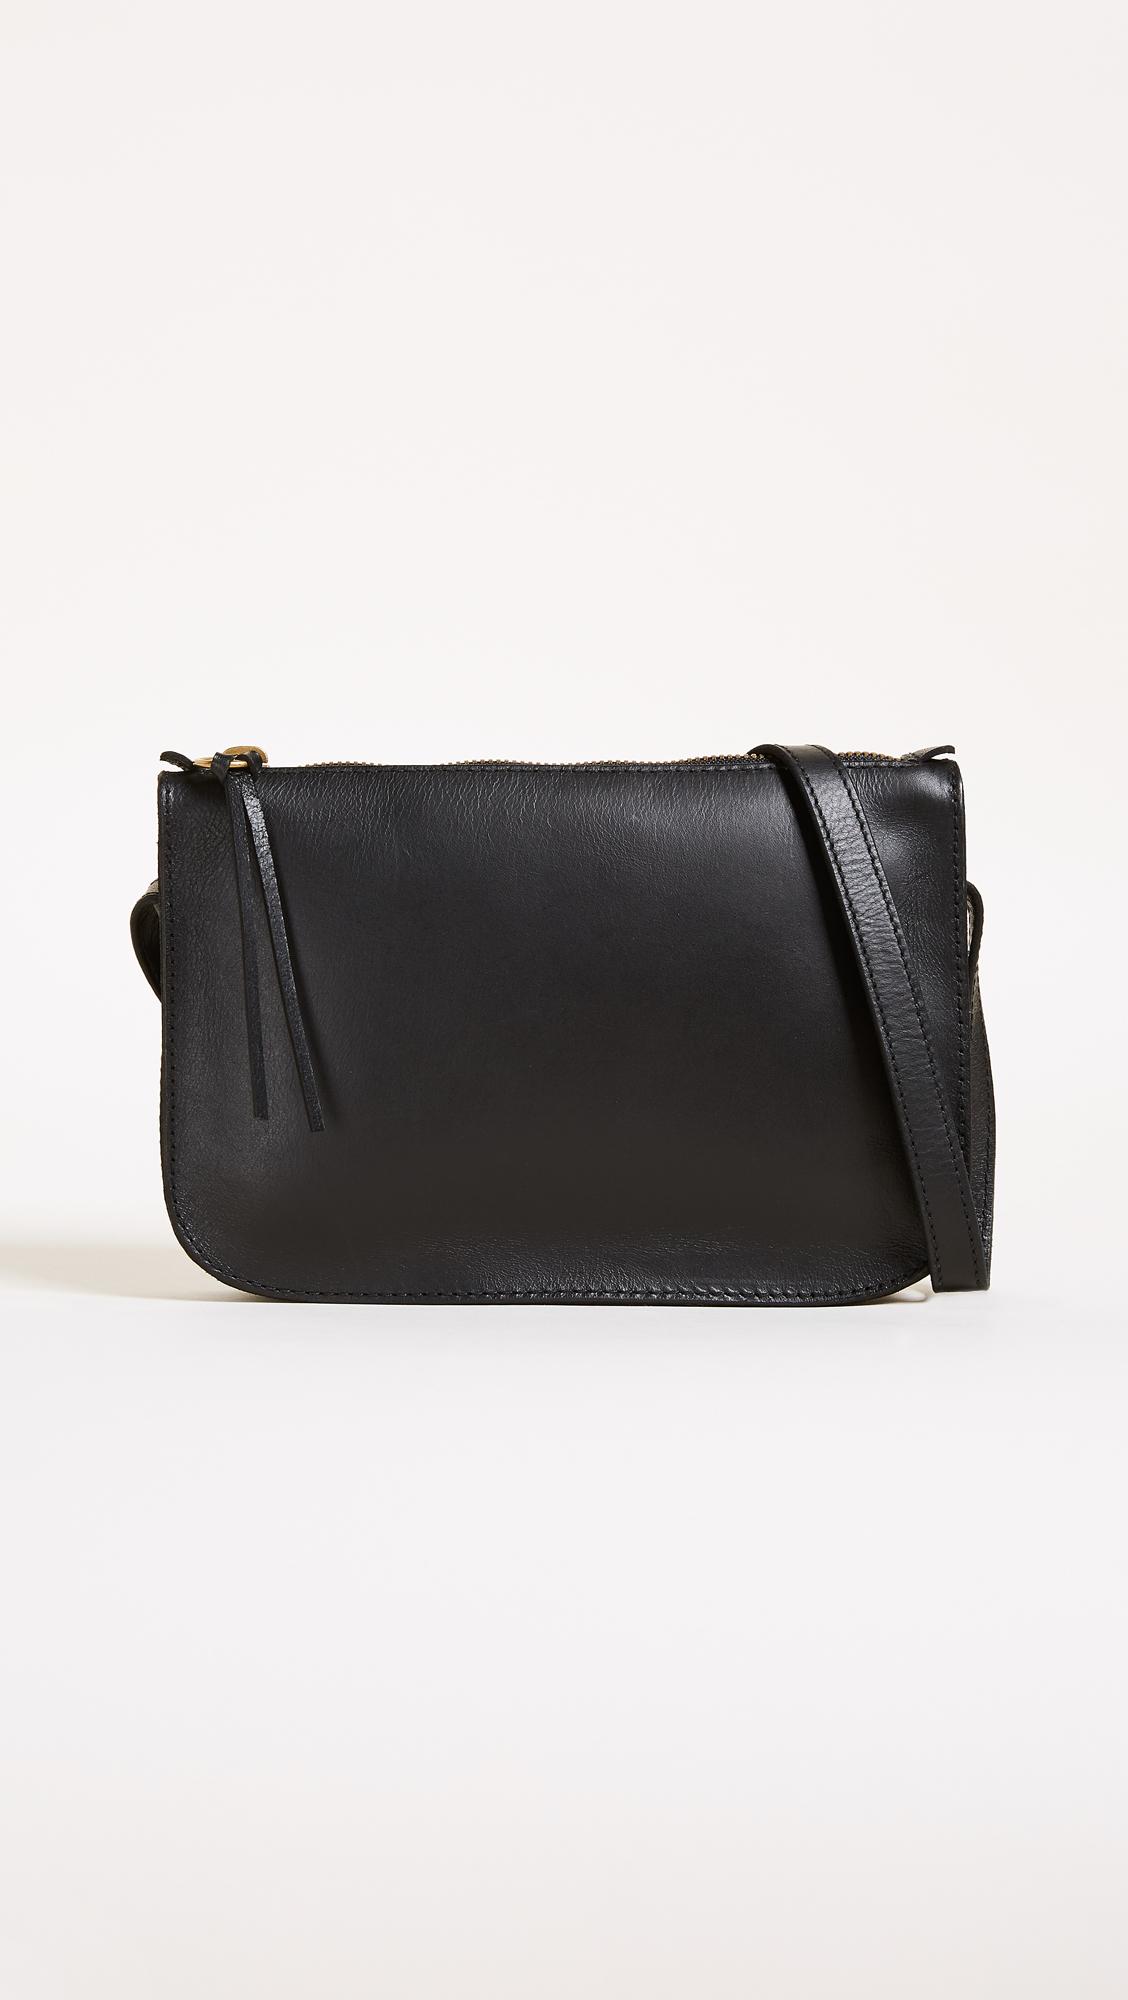 Madewell The Simple Crossbody Bag in True Black - Size One S